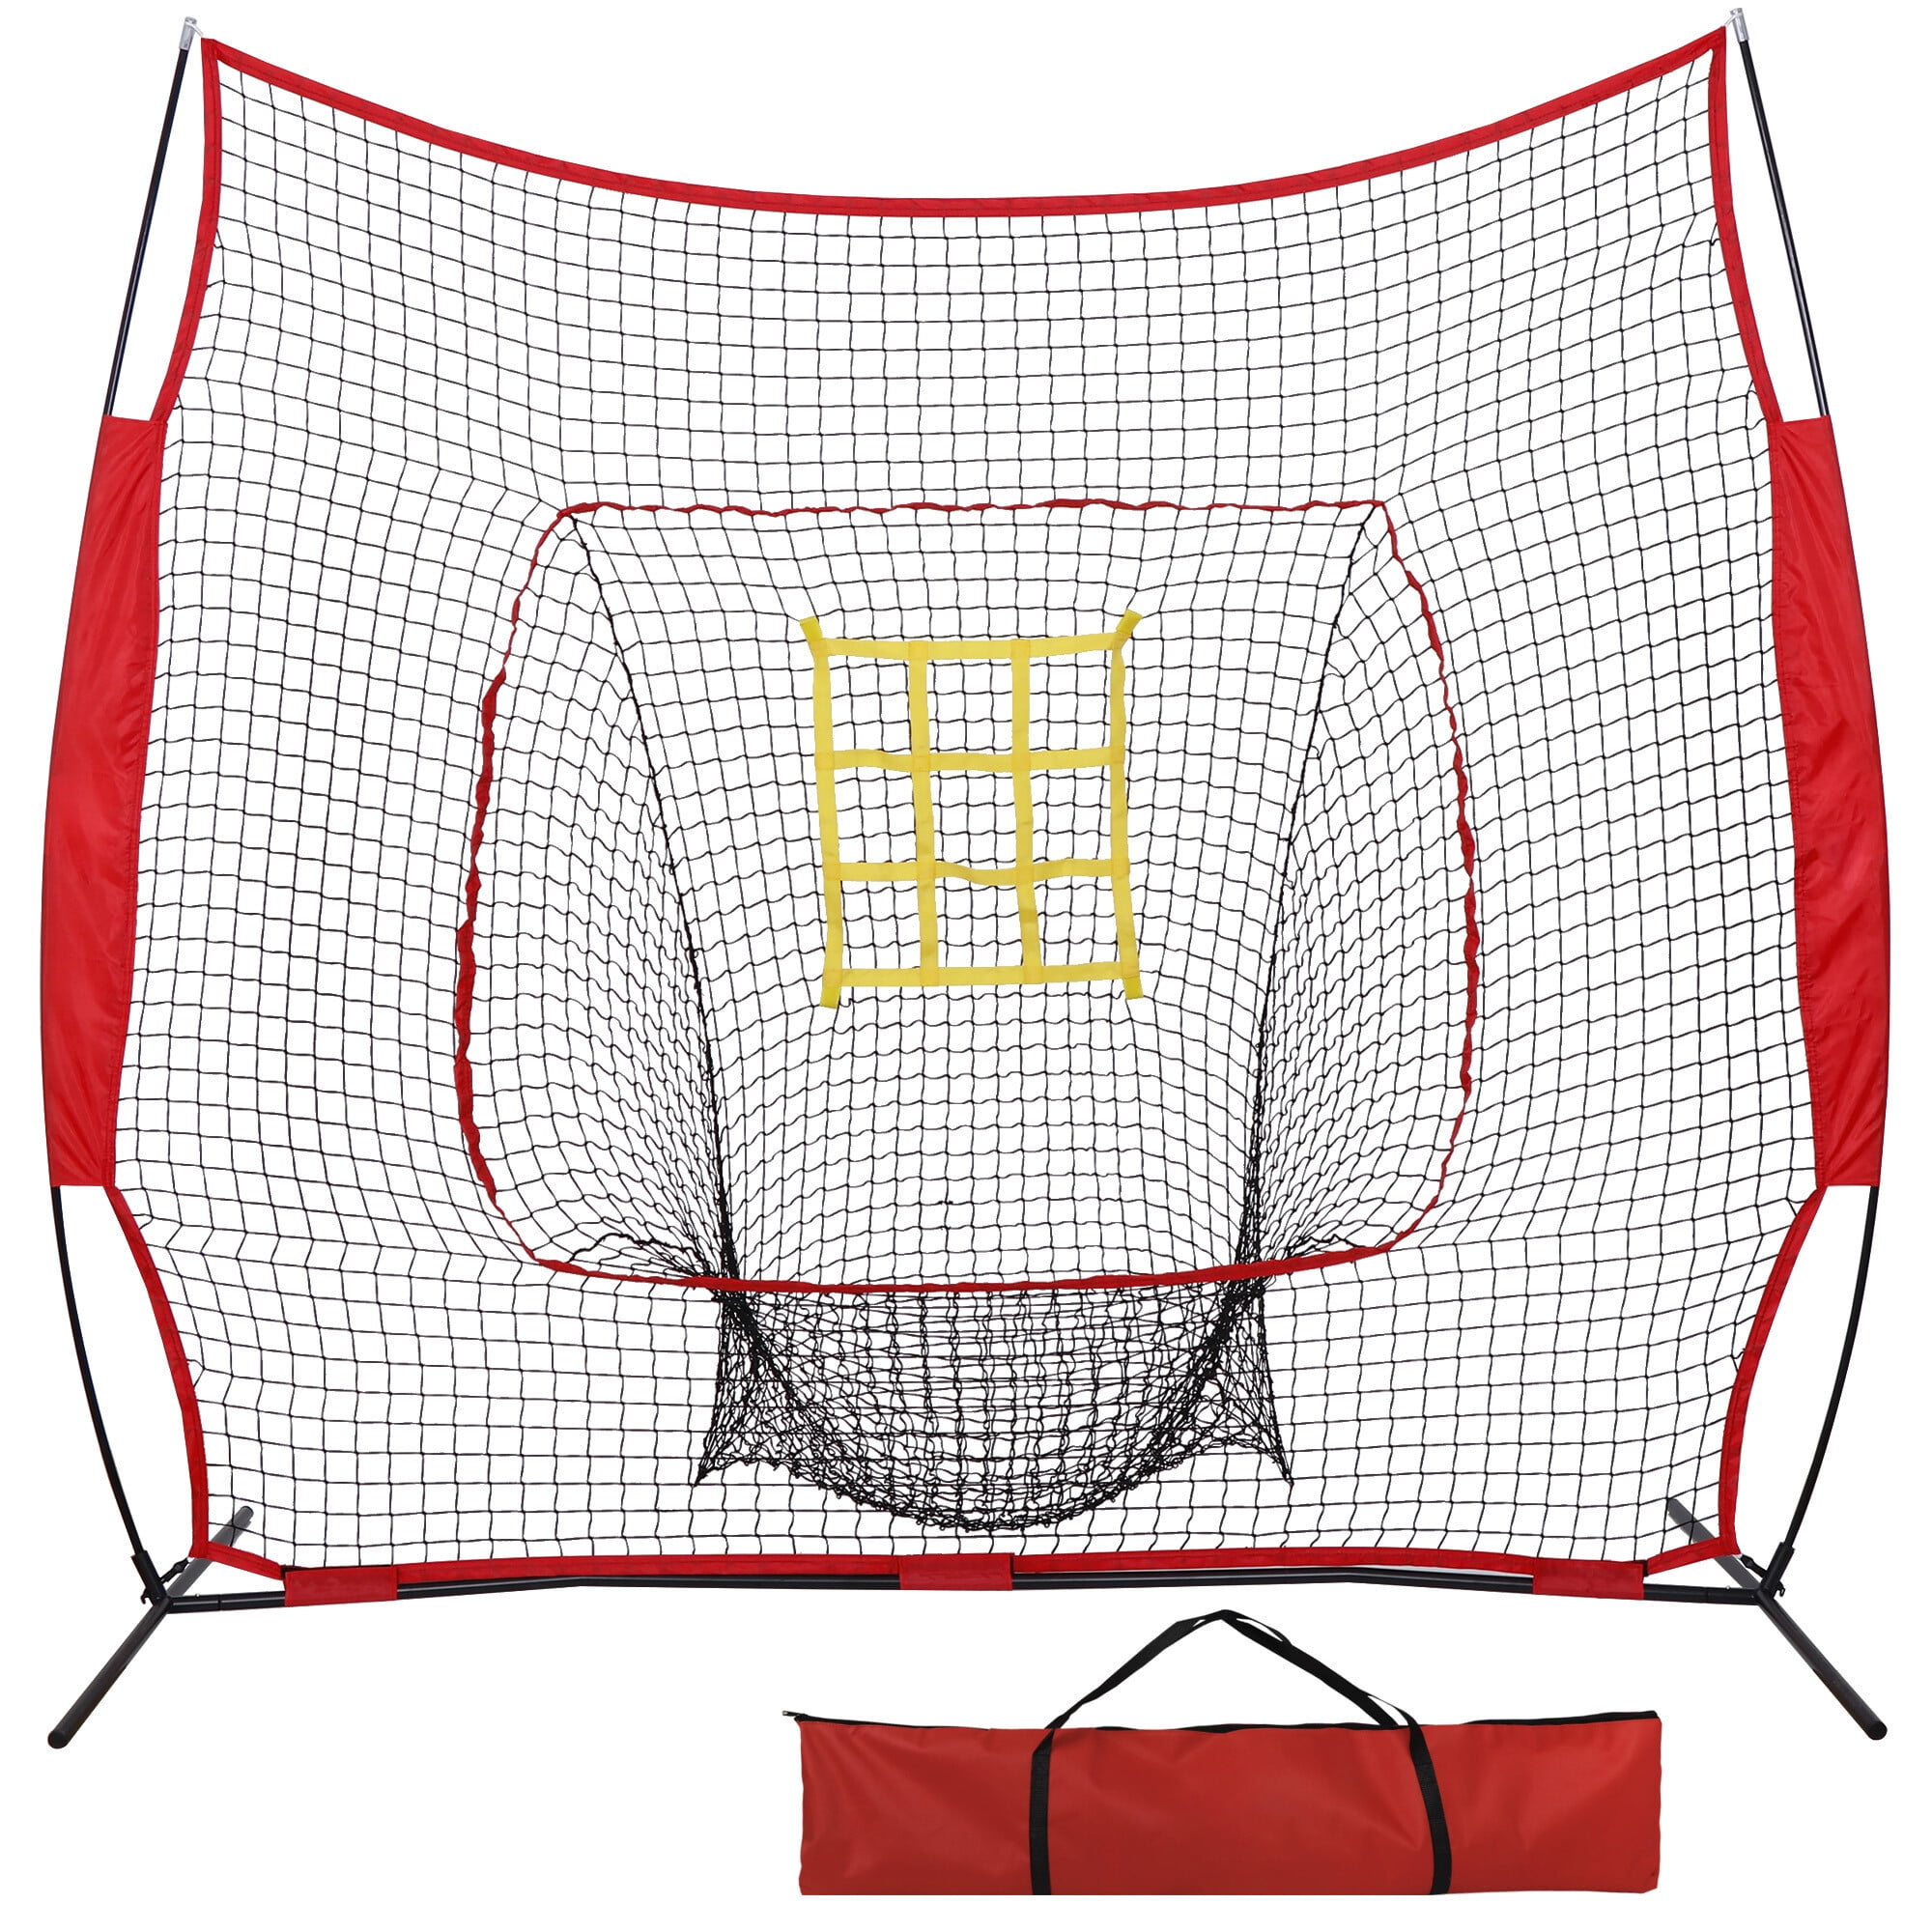 PowerNet Pro Pitching Batting Enhancer Bundle for Baseball Softball Includes 7x7 Net Strike Zone Attachment and 12 Pack Recreation Grade Regulation Size Balls Deluxe Tee 